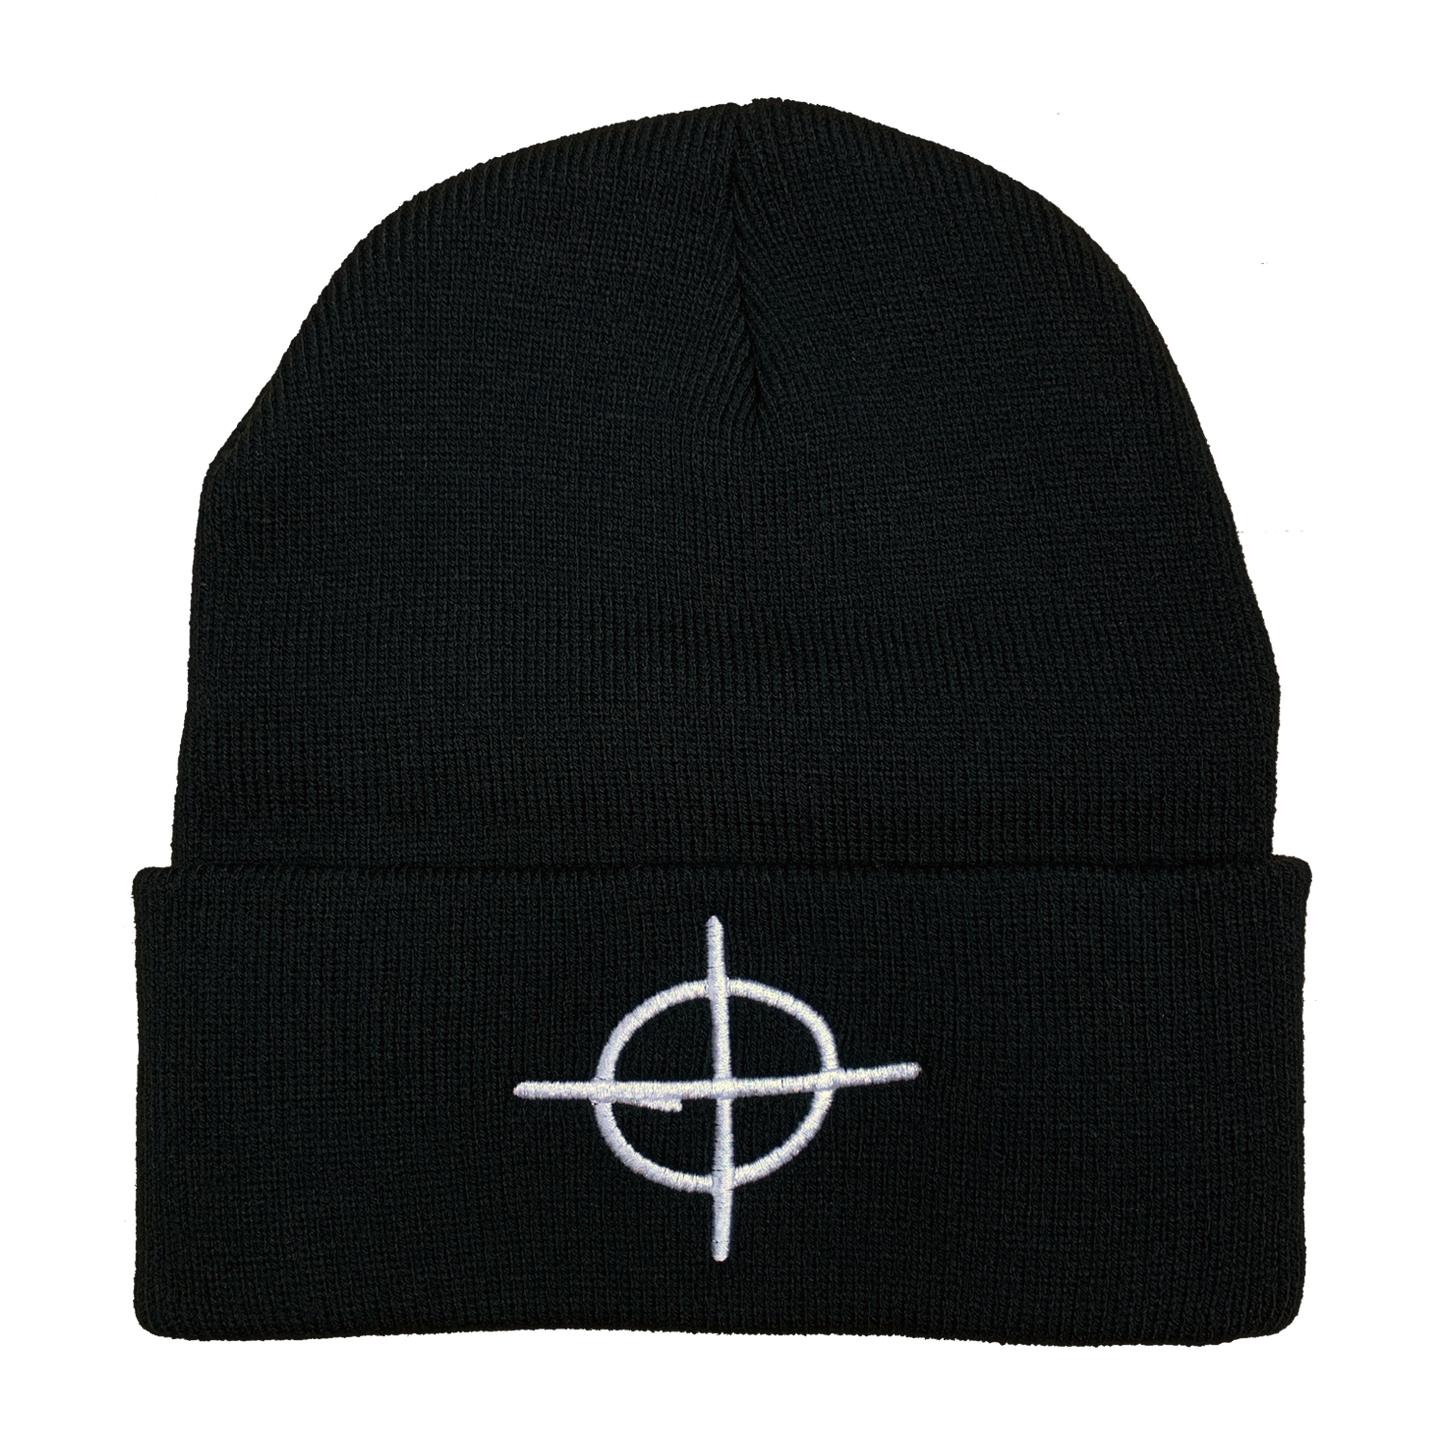 Zodiac Killer Embroidered Beanie - UNMASKED Horror & Punk Patches and Decor